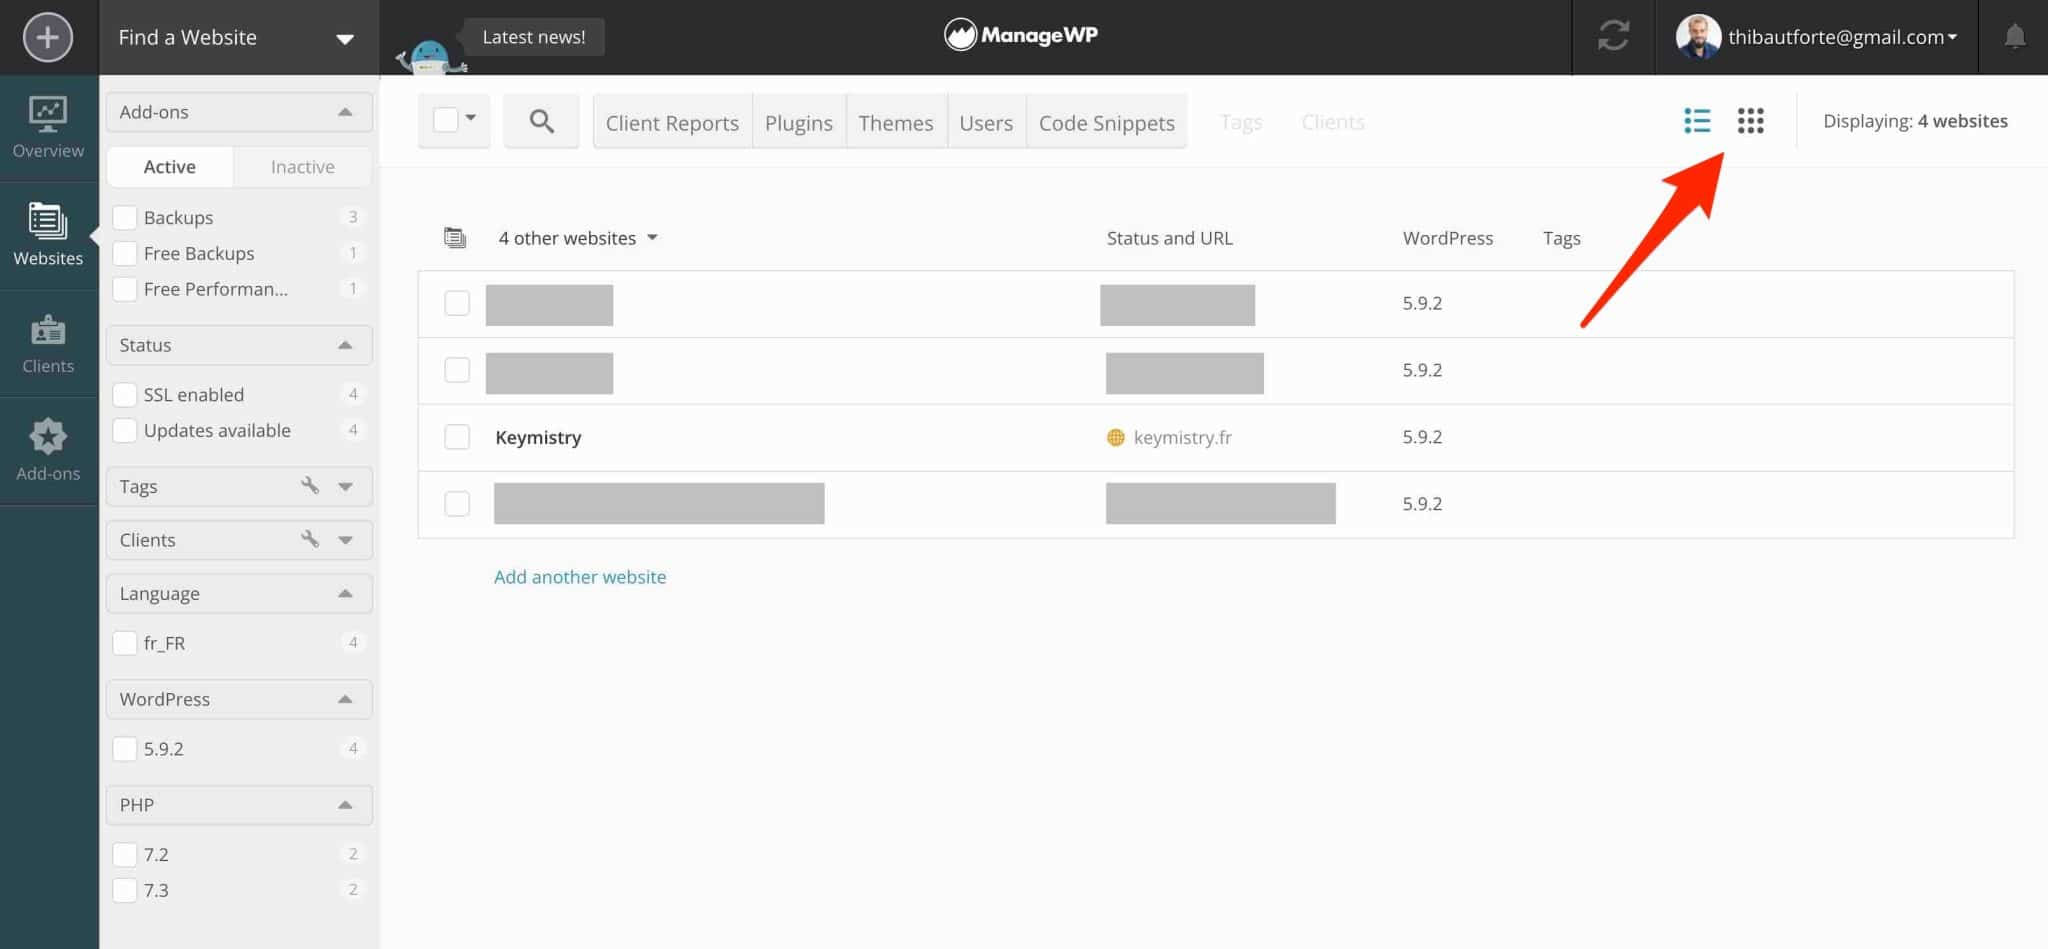 ManageWP offers 2 different views in the dashboard: List or thumbnail.